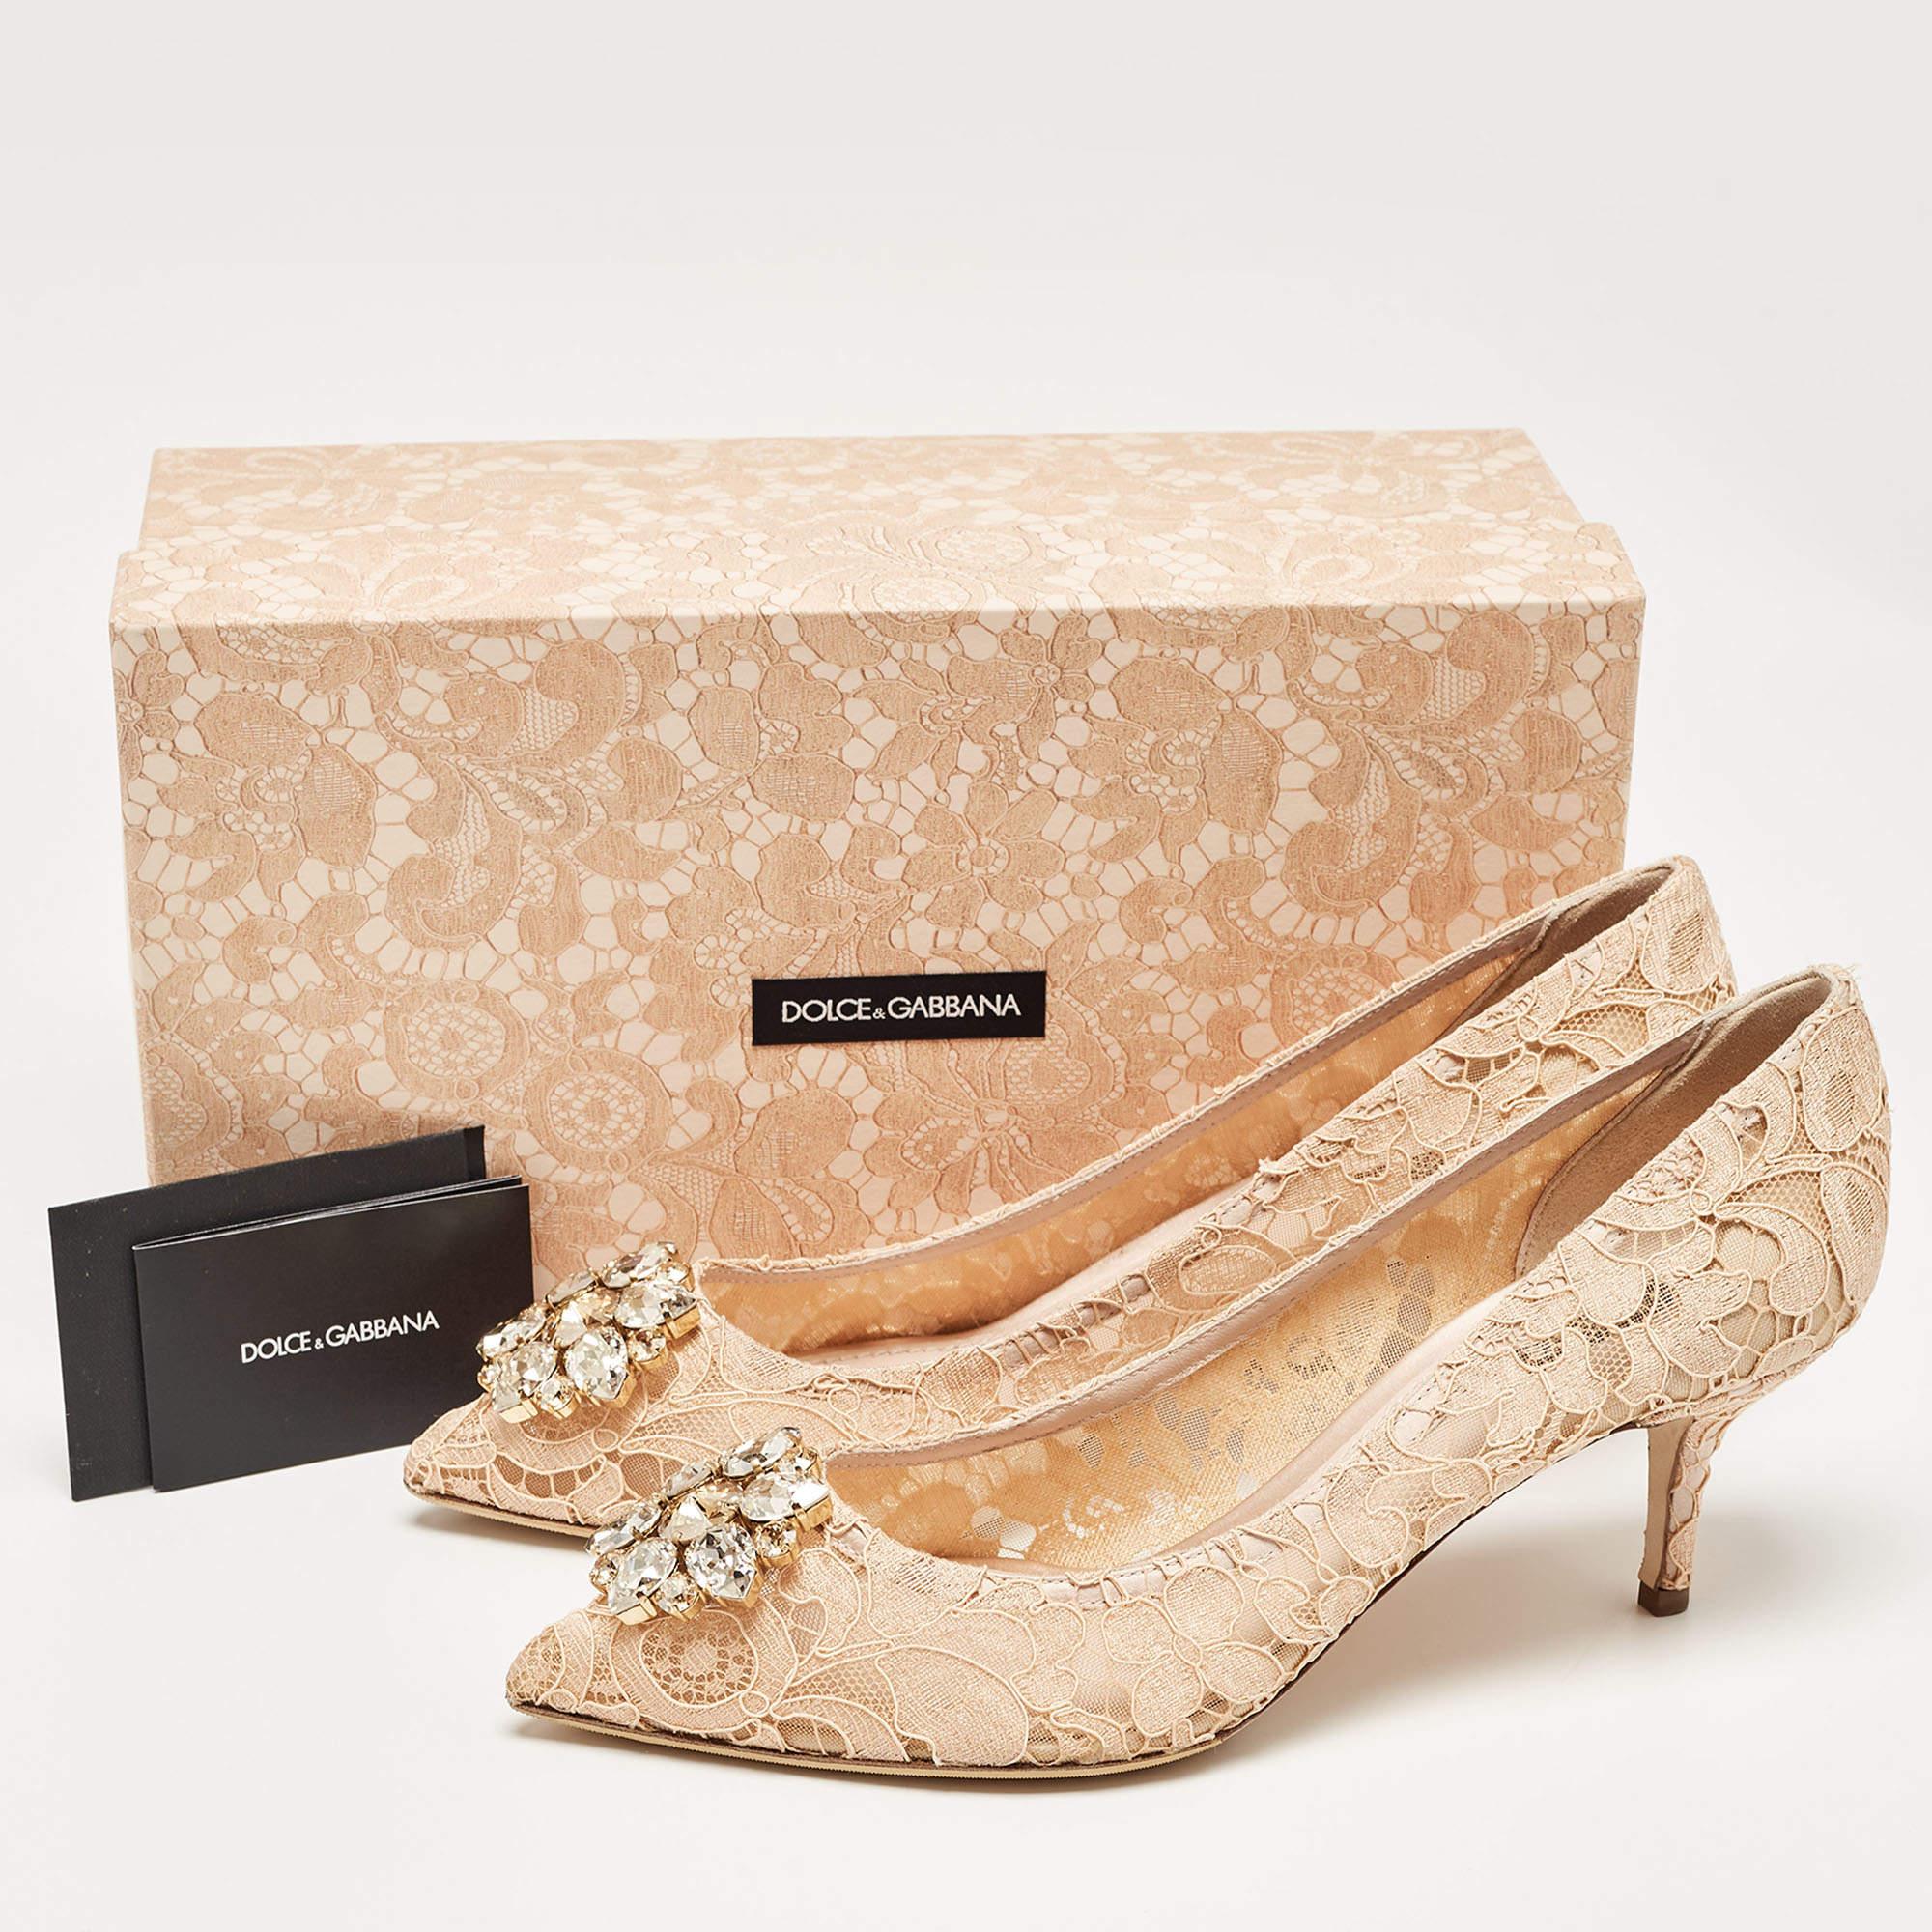 Dolce & Gabbana Peach Lace Bellucci Crystals Pumps Size 41 For Sale 5